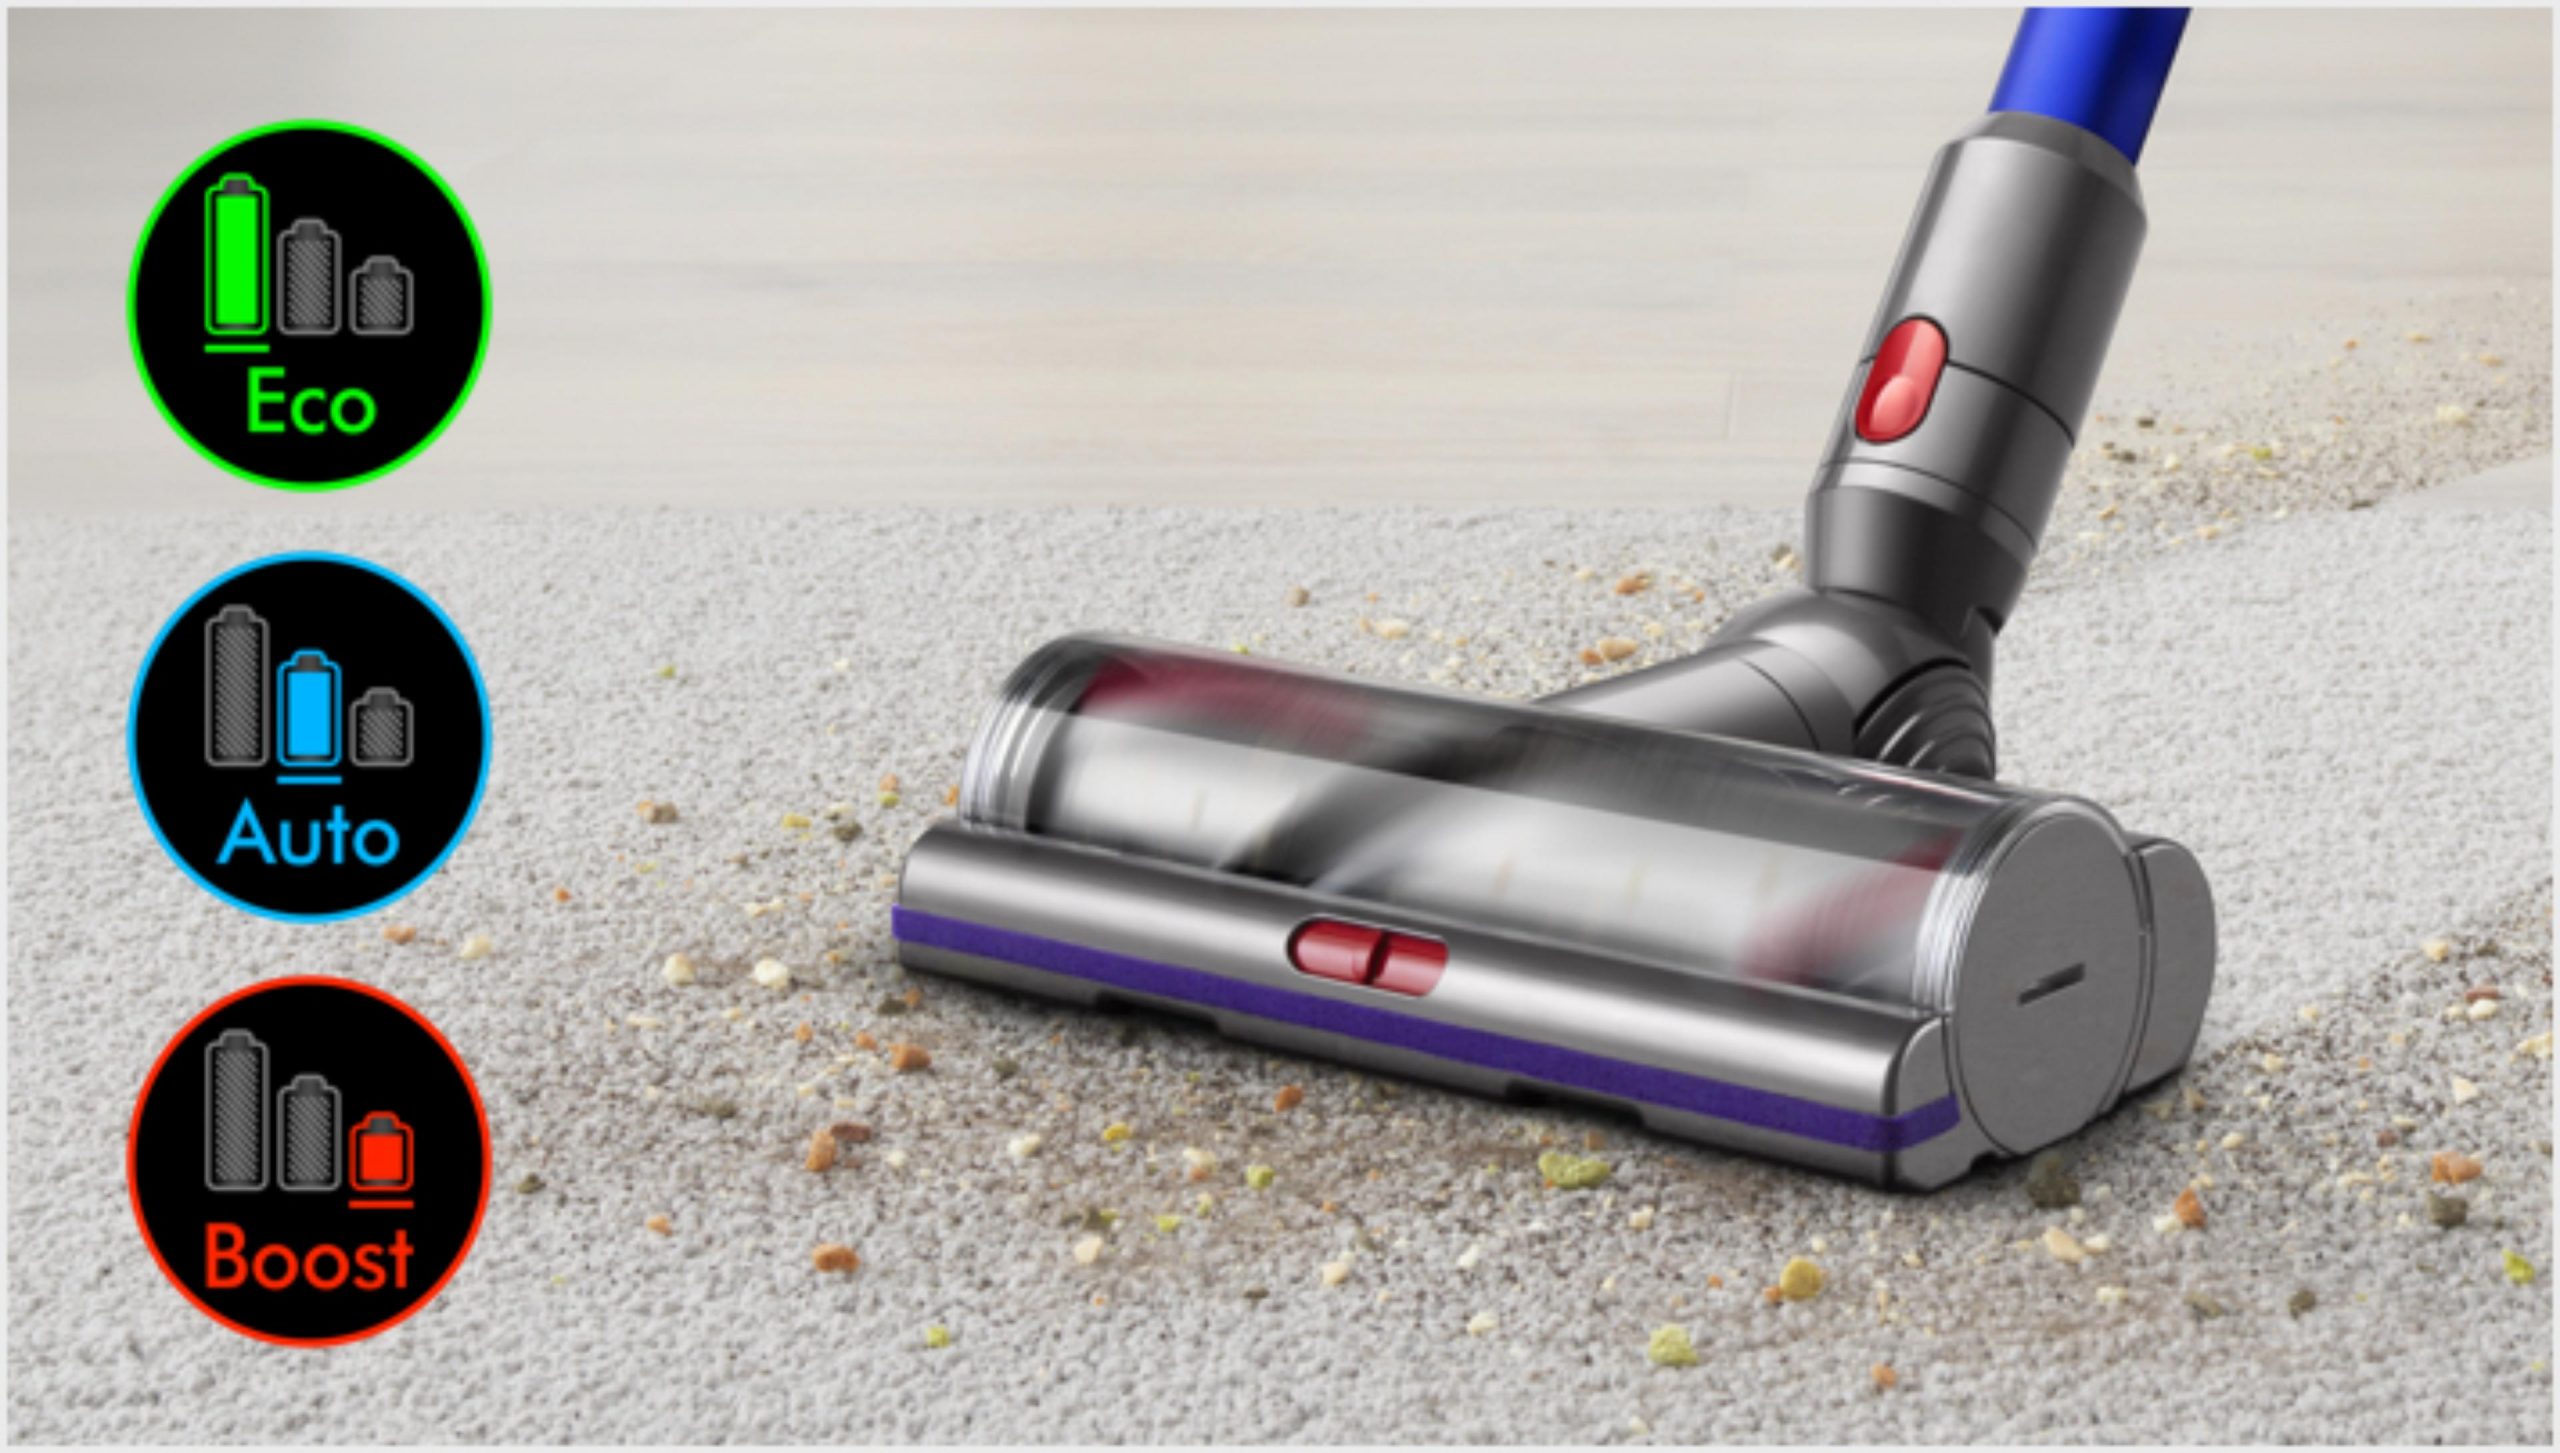 Dyson V11 Absolute Pro vacuum cleaner